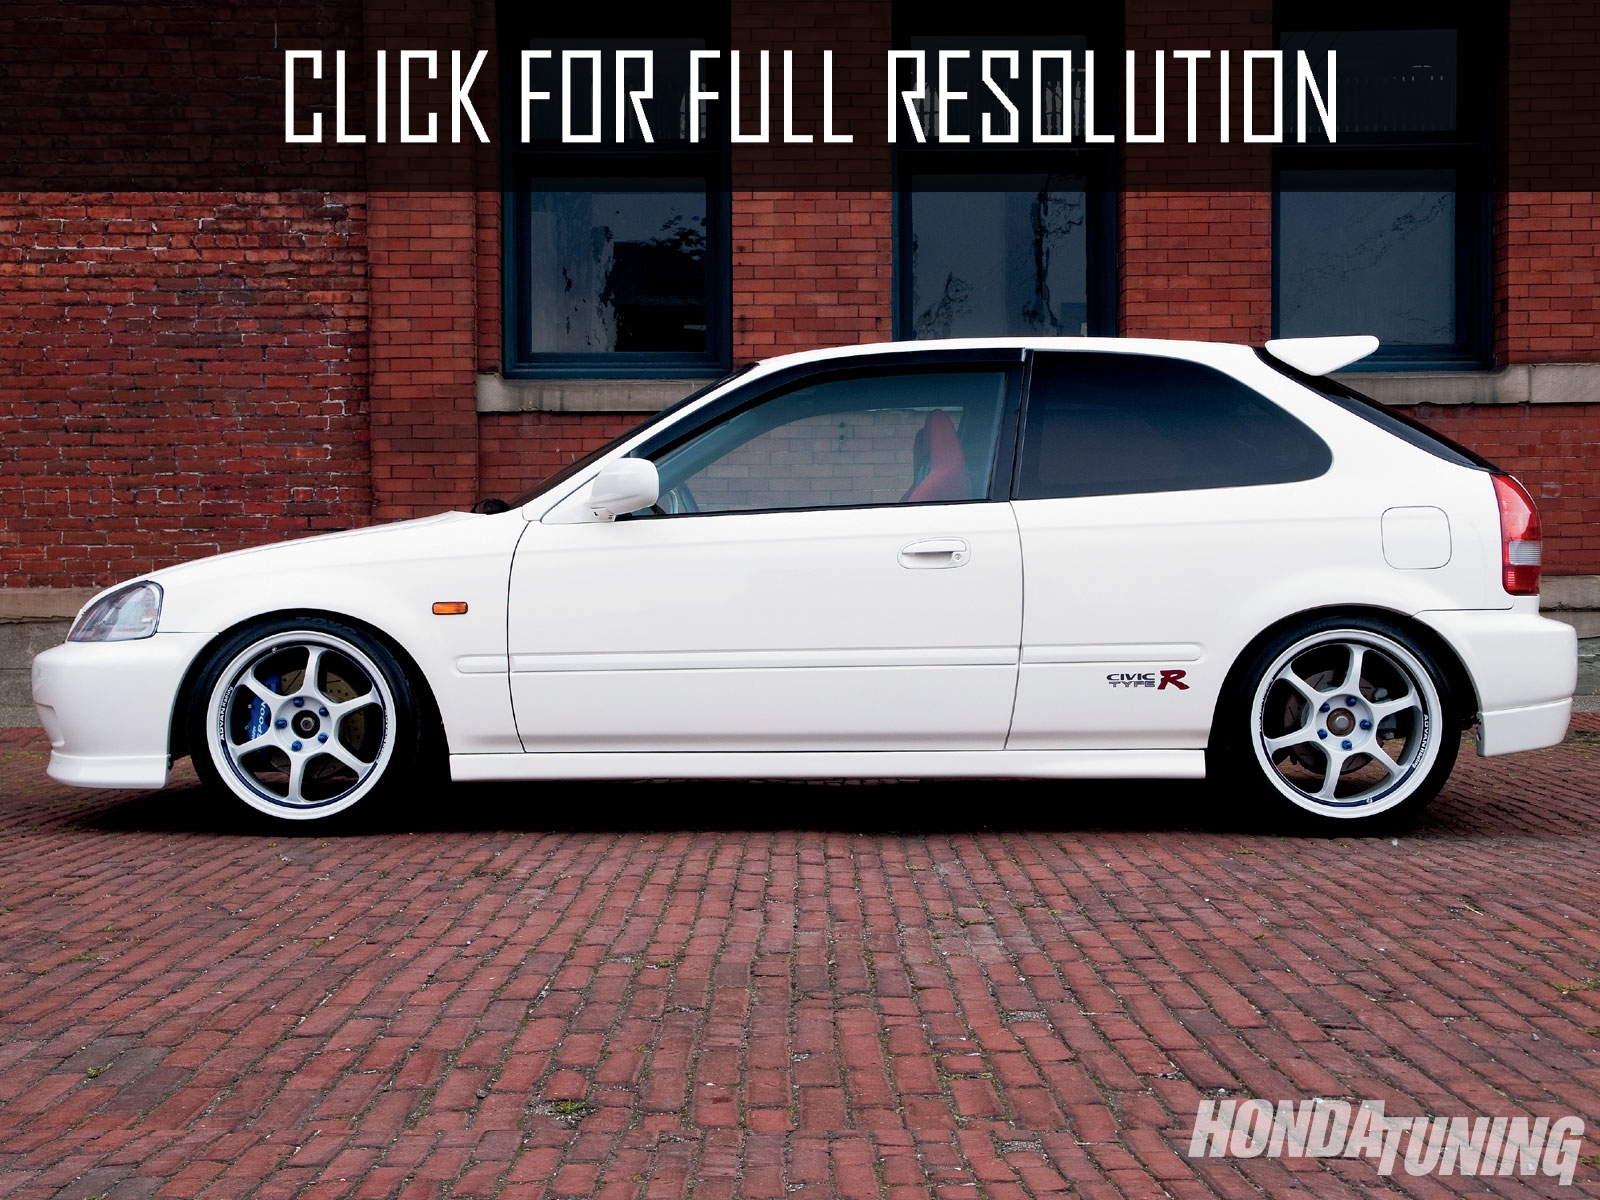 2000 Honda Civic Type R Best Image Gallery 4 15 Share And